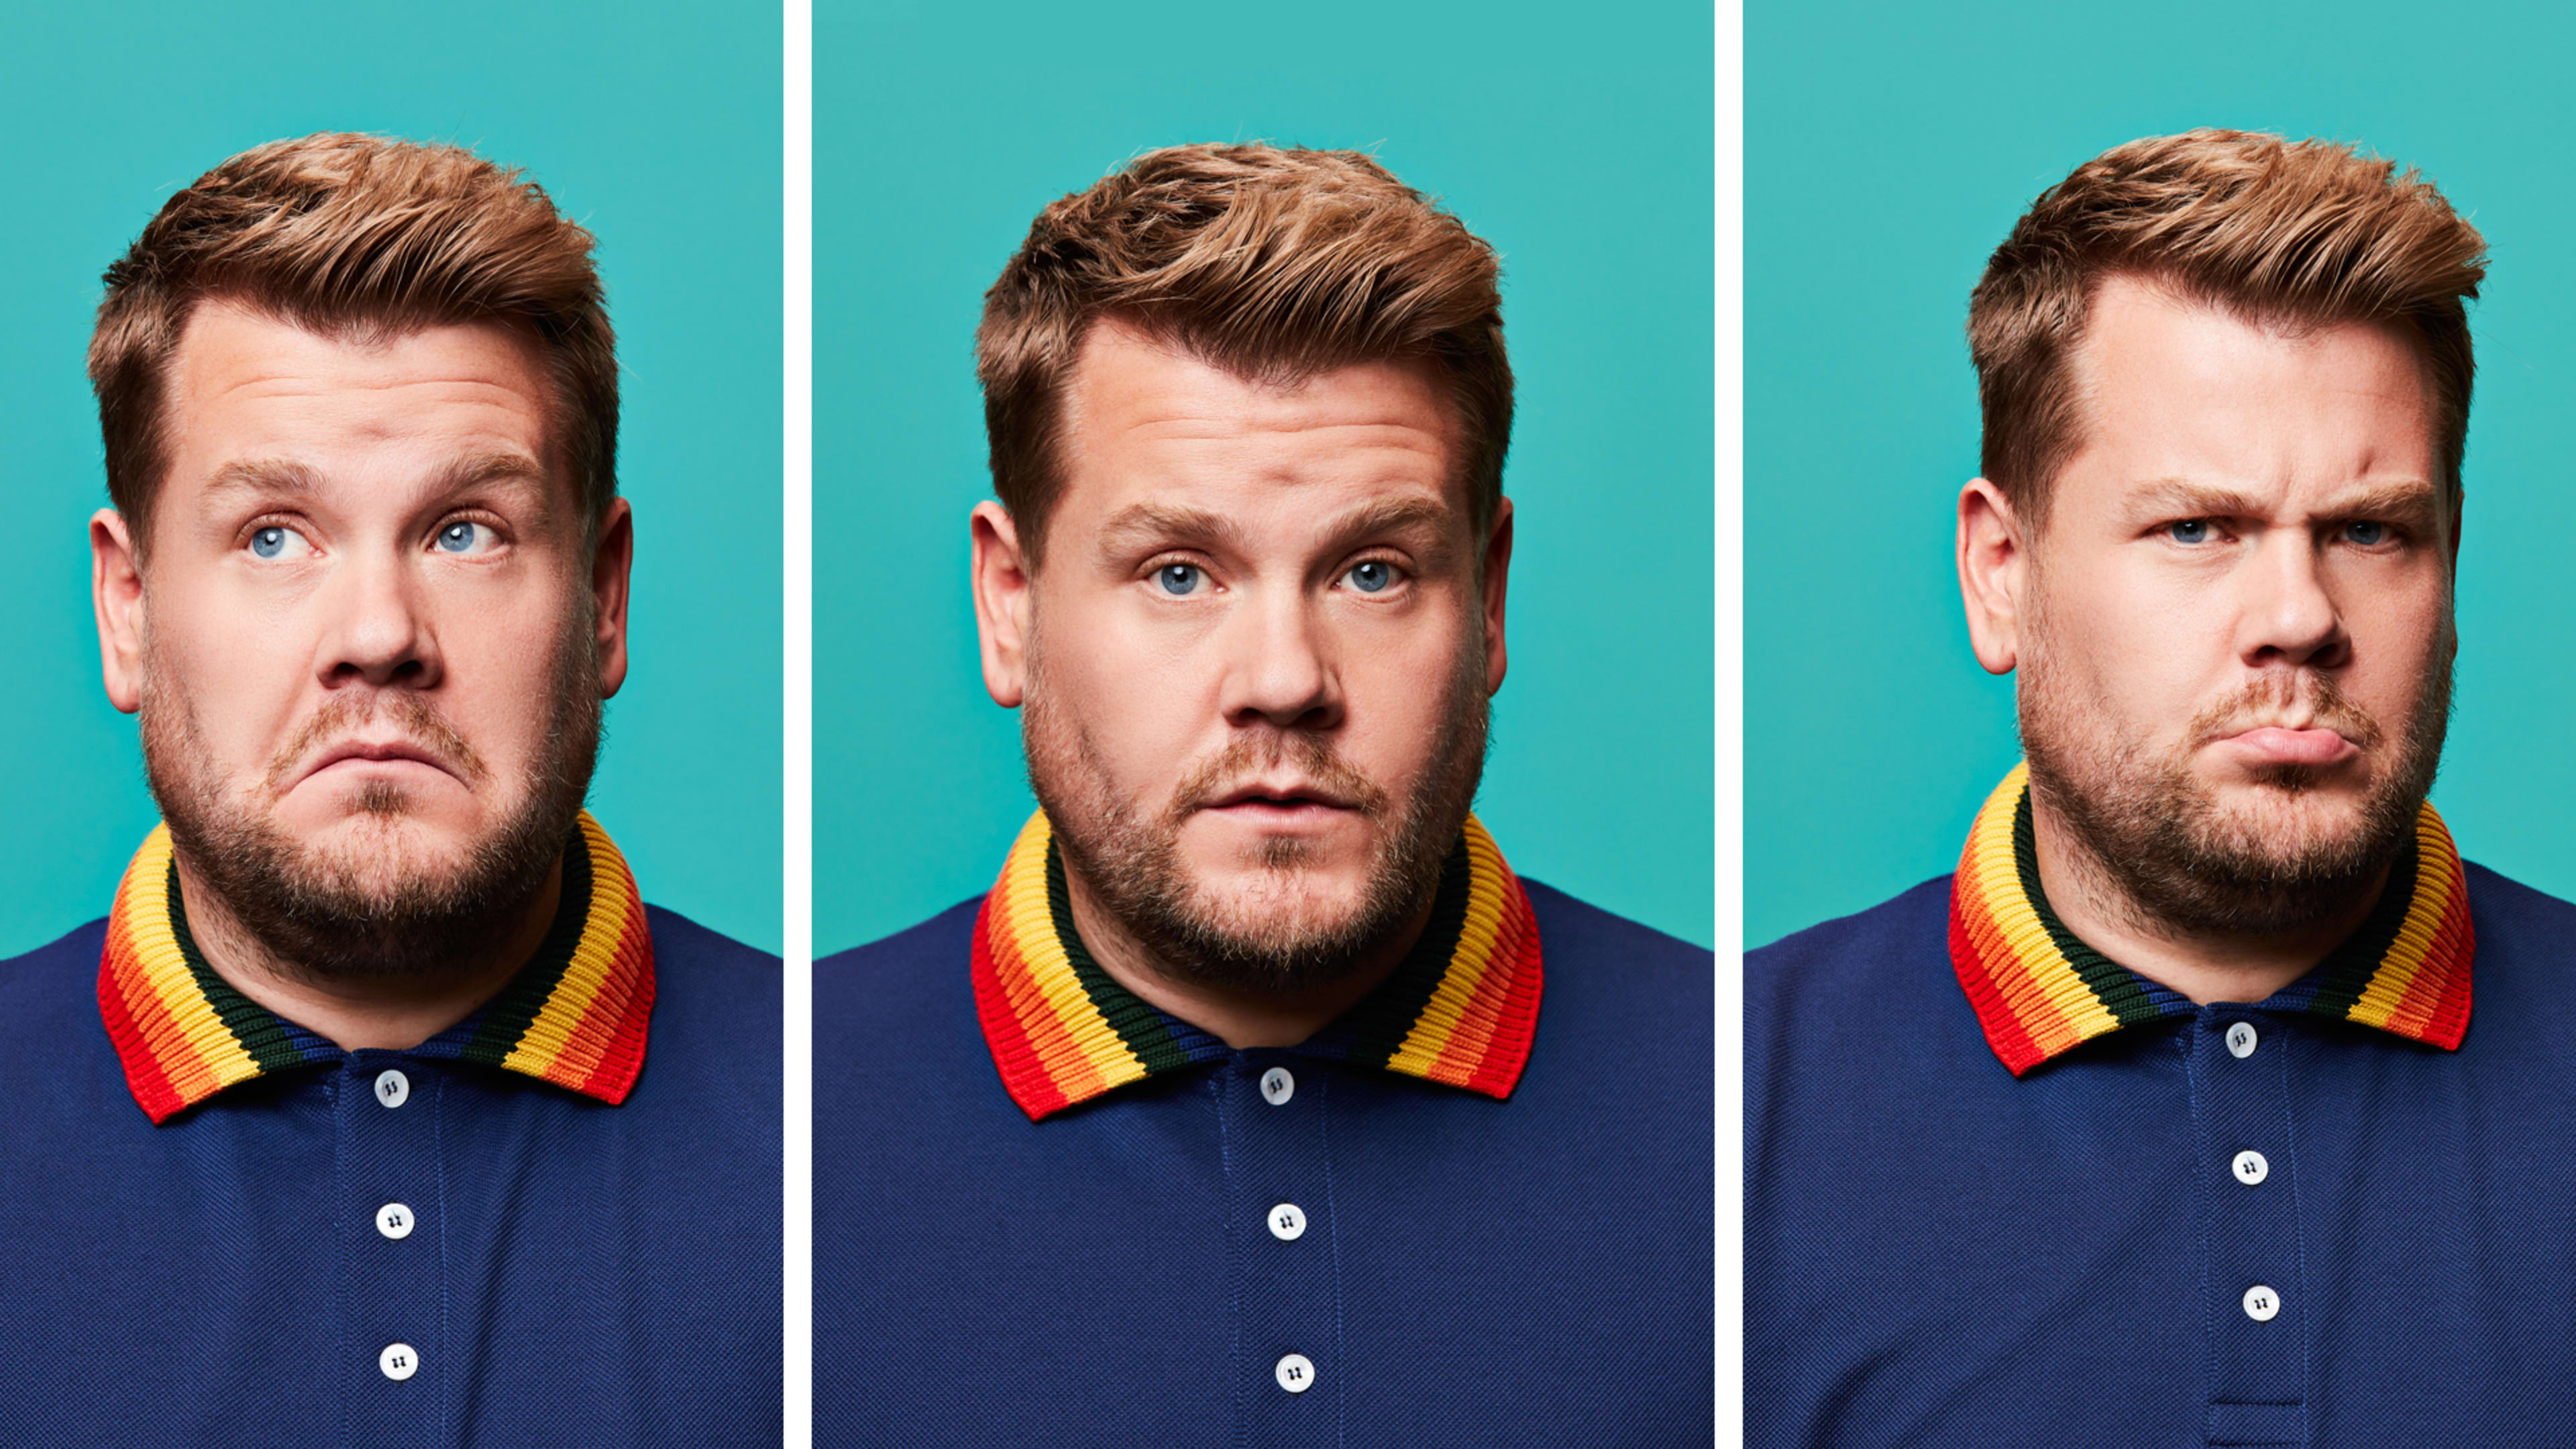 James Corden Lives In The Moment. Here’s How